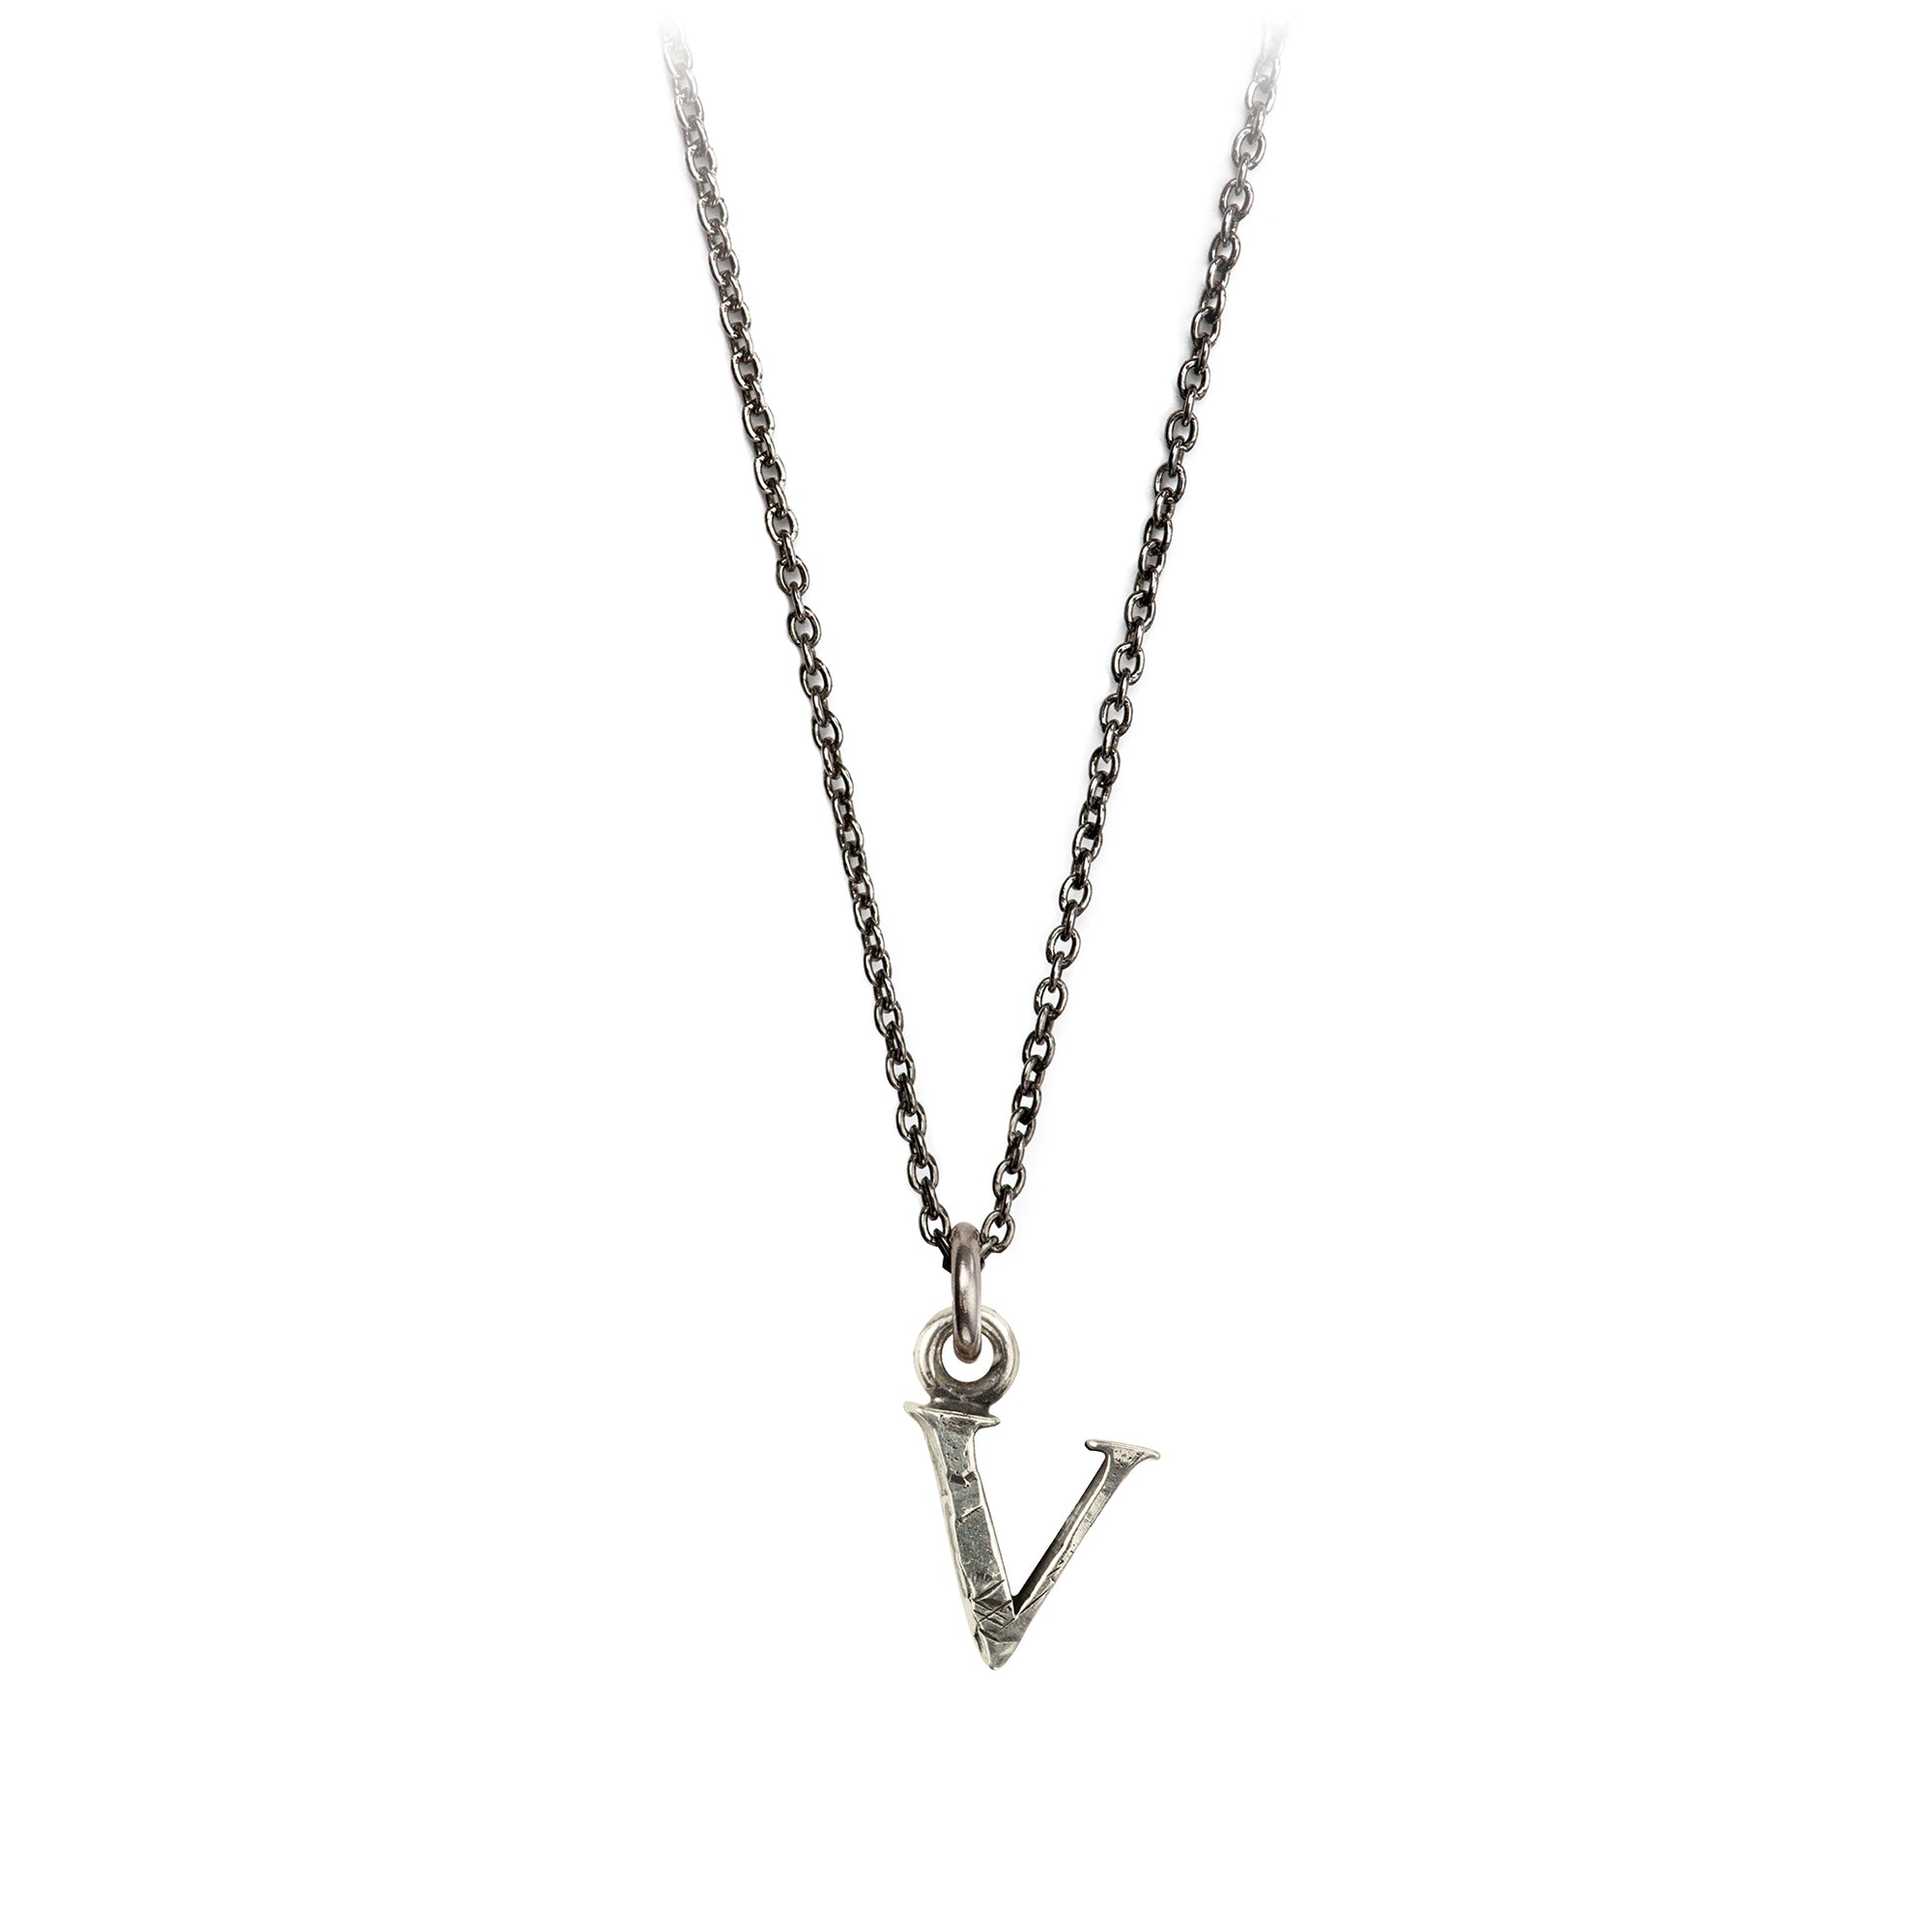 A sterling silver letter "V" charm on a silver chain.